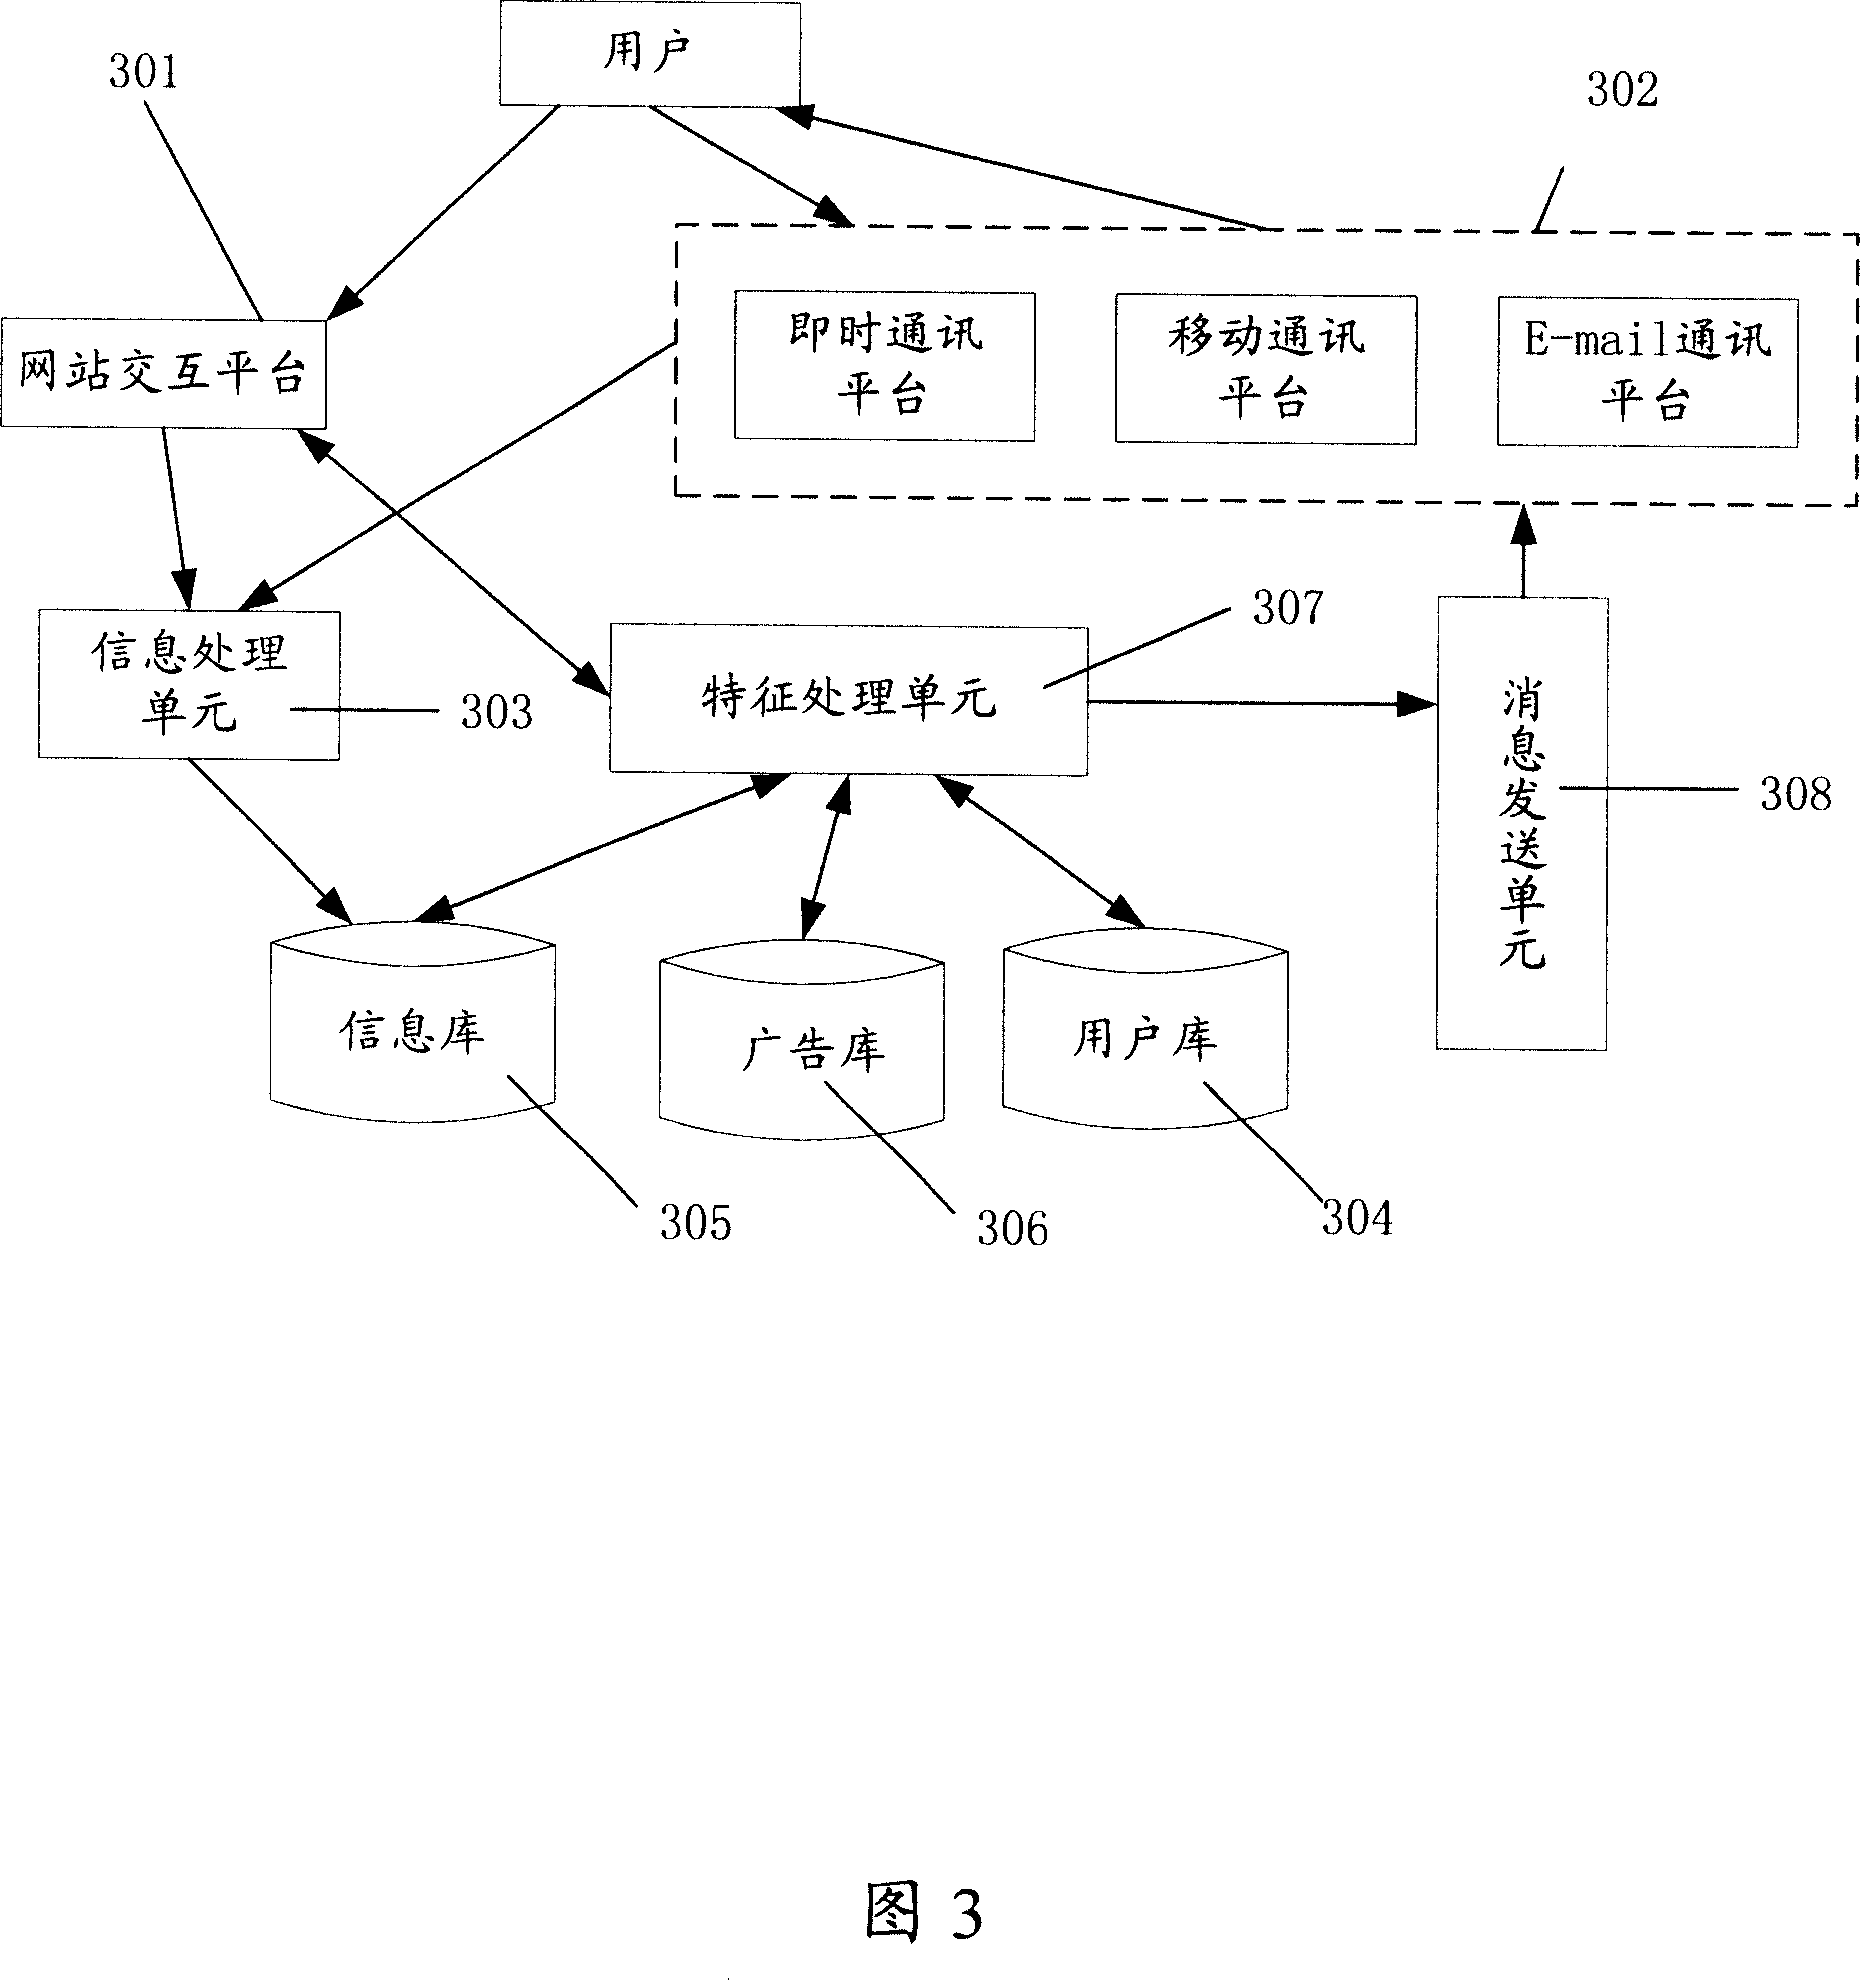 System and method for transmitting advertisement information